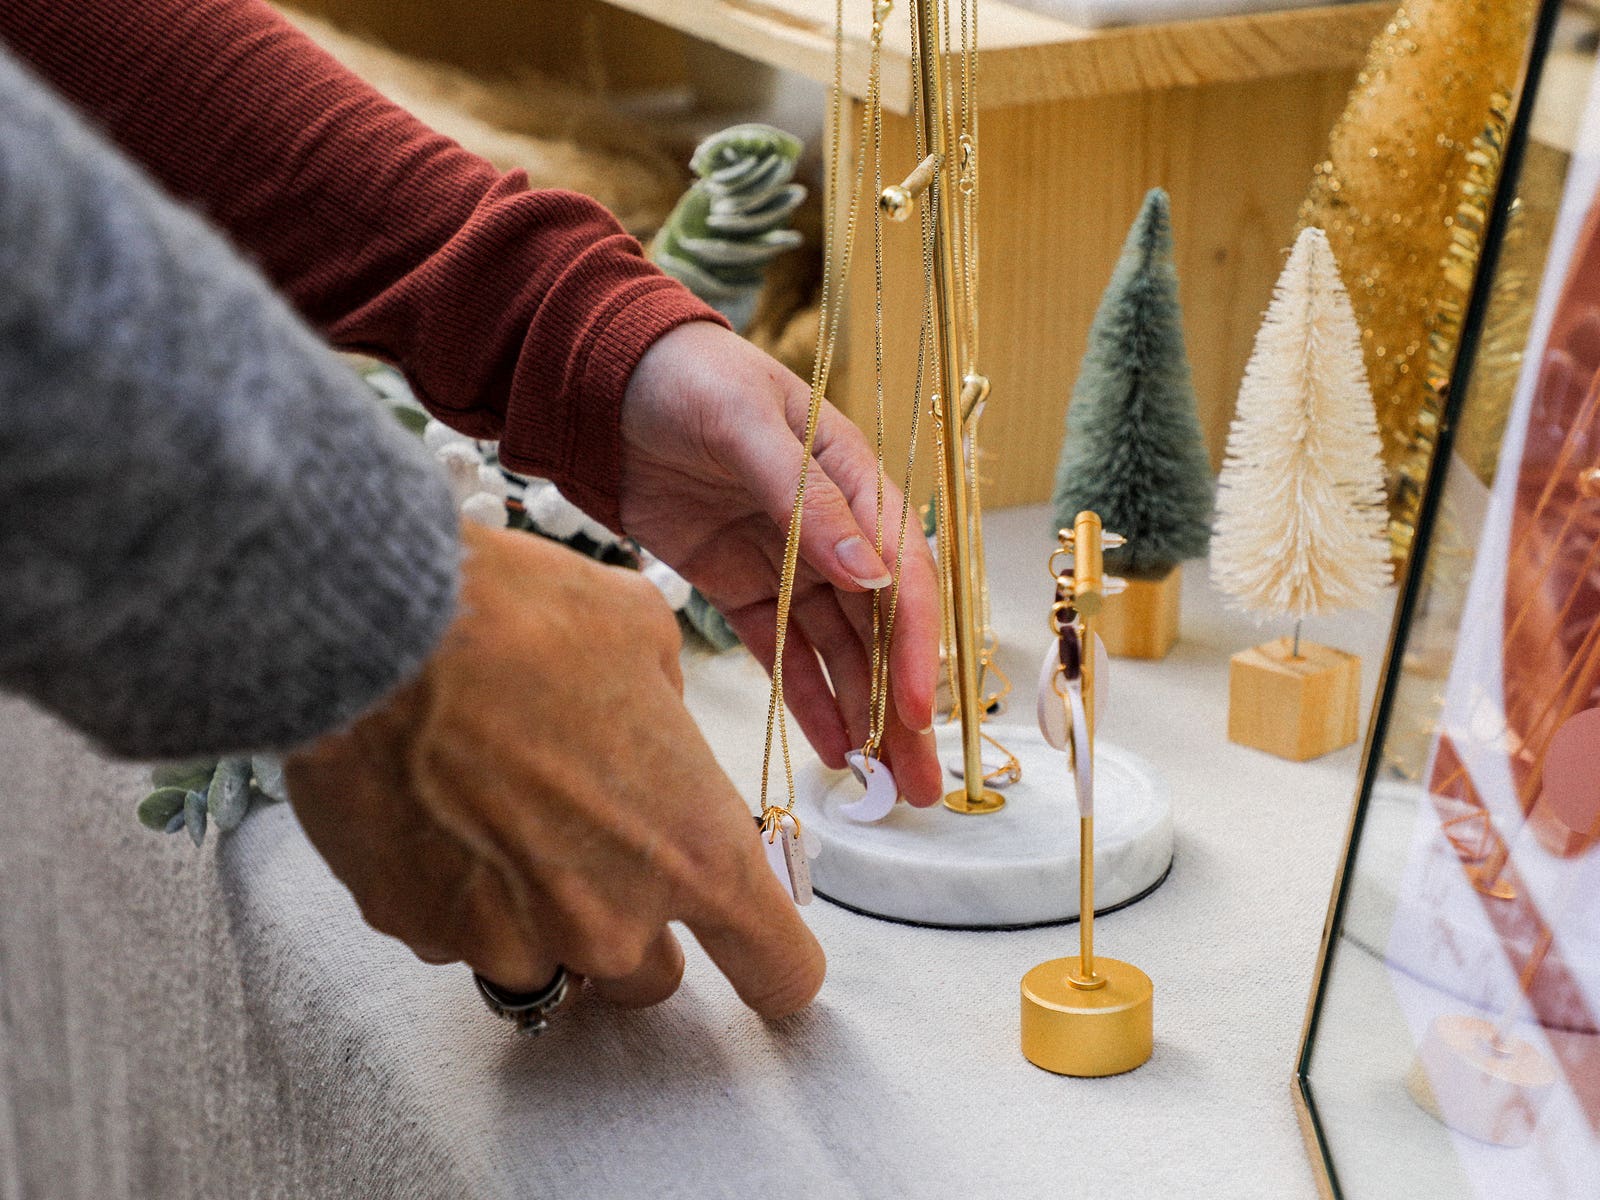 Shoppers examine jewelry at the FIDM Holiday Market